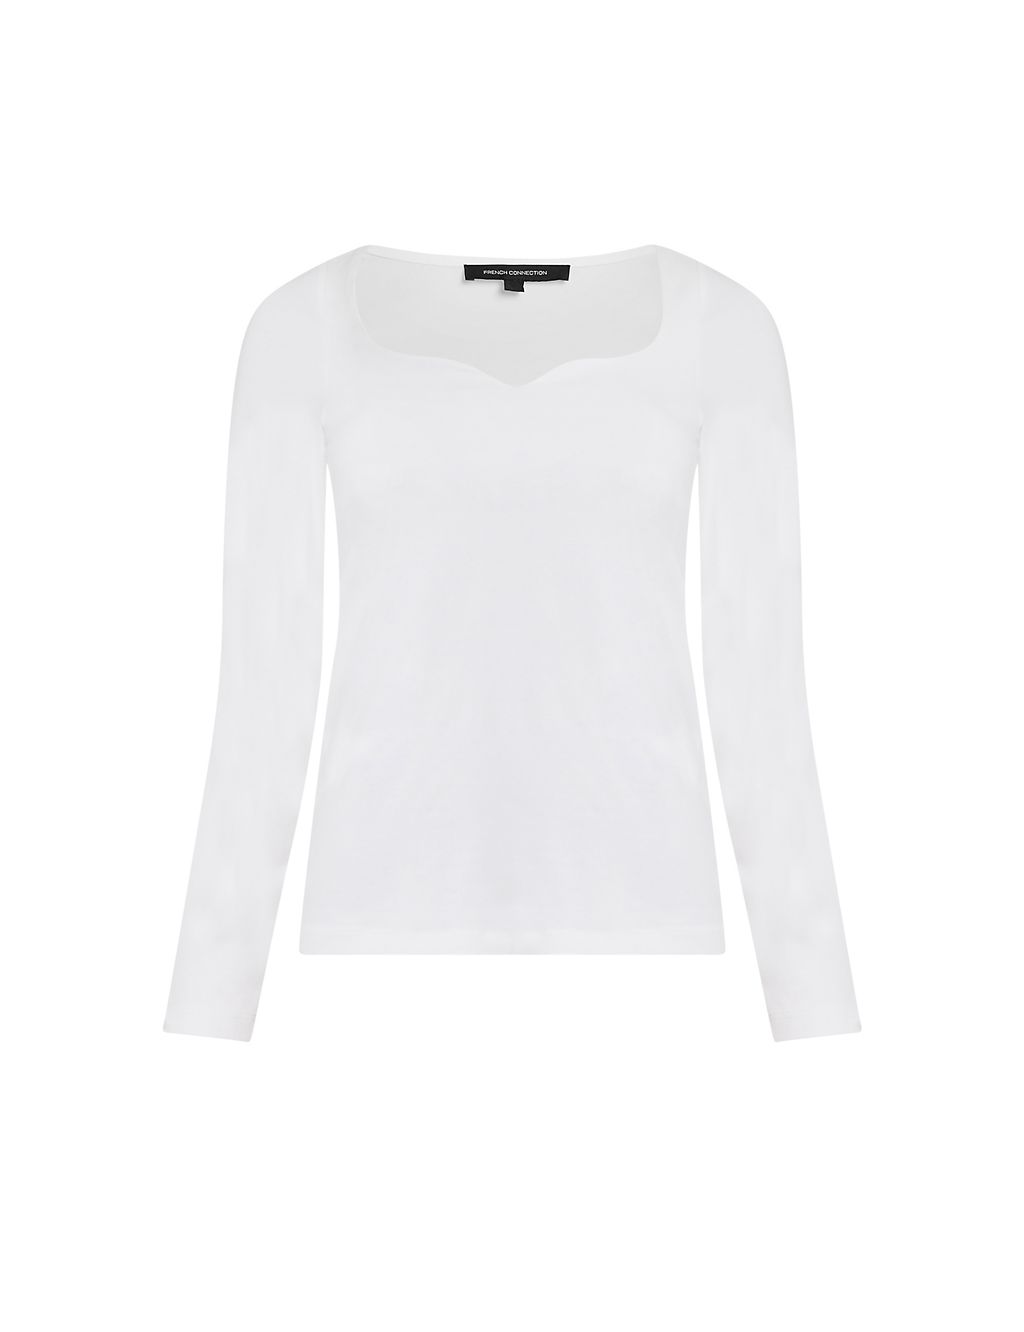 Cotton Rich Relaxed Top | French Connection | M&S